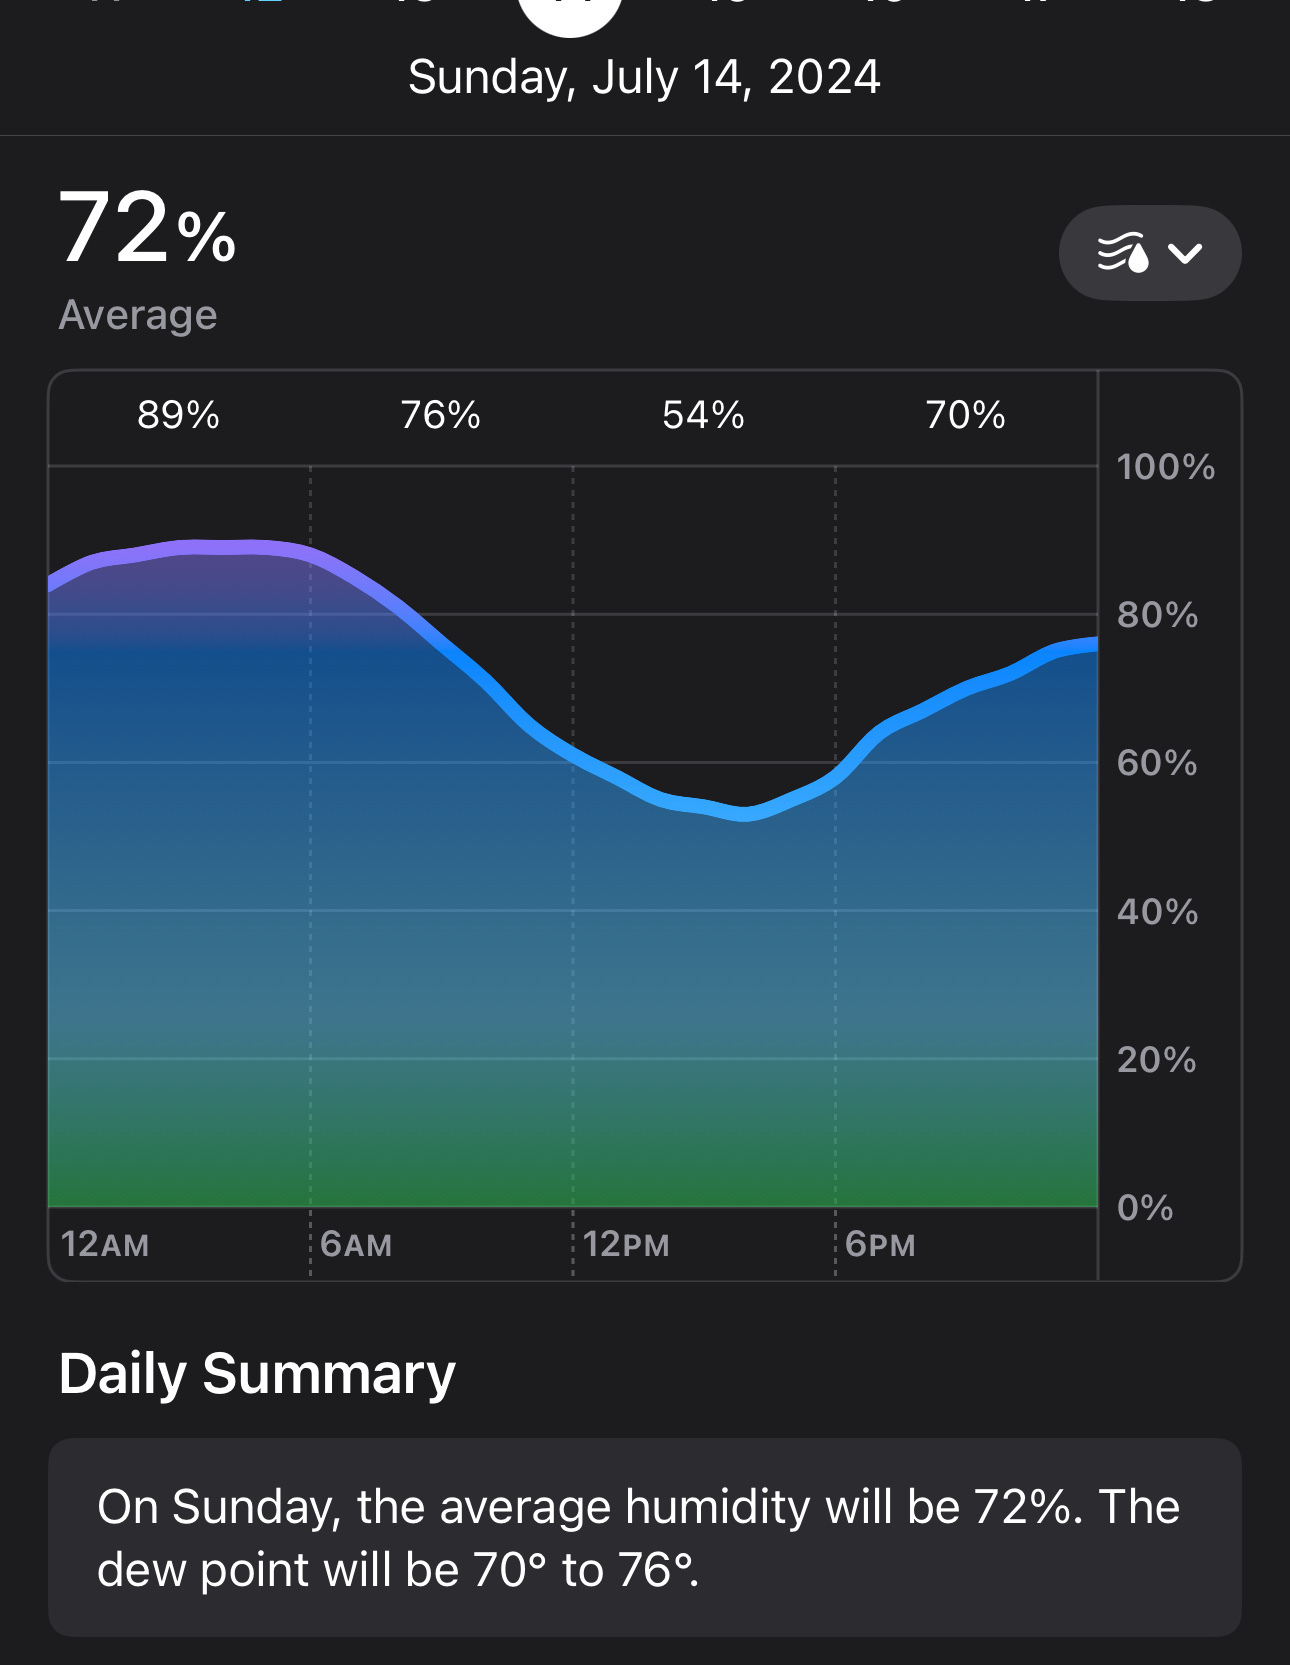 A weather graph shows the hourly average humidity percentages throughout Sunday, July 14, 2024, with a daily summary indicating an average humidity of 72% and a dew point range of 70° to 76°.